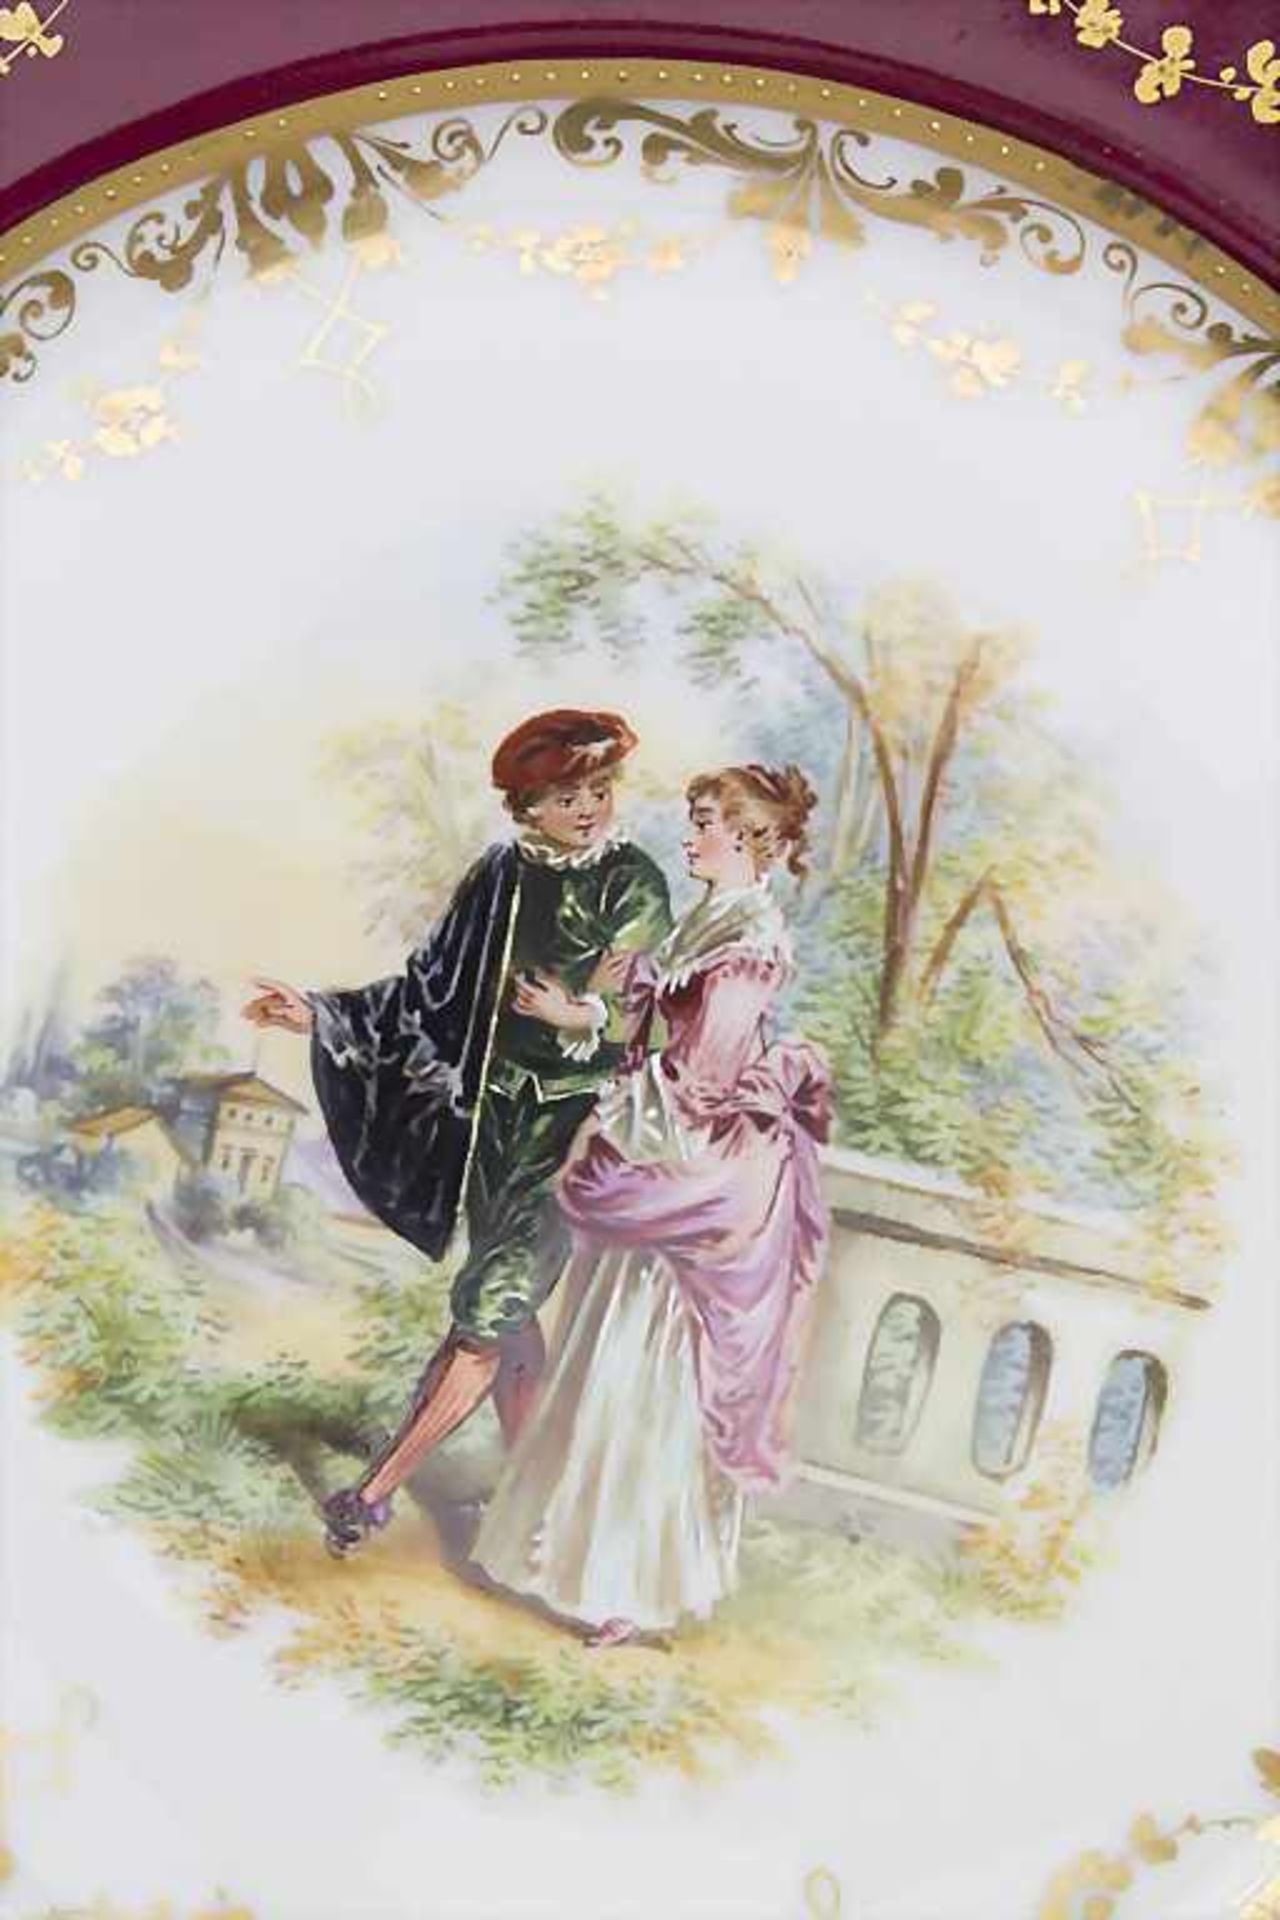 Zierteller mit Galanterie 'Rokoko-Paar' / A plate with a Rococo couple, Dresden, um 1900 - Image 2 of 5